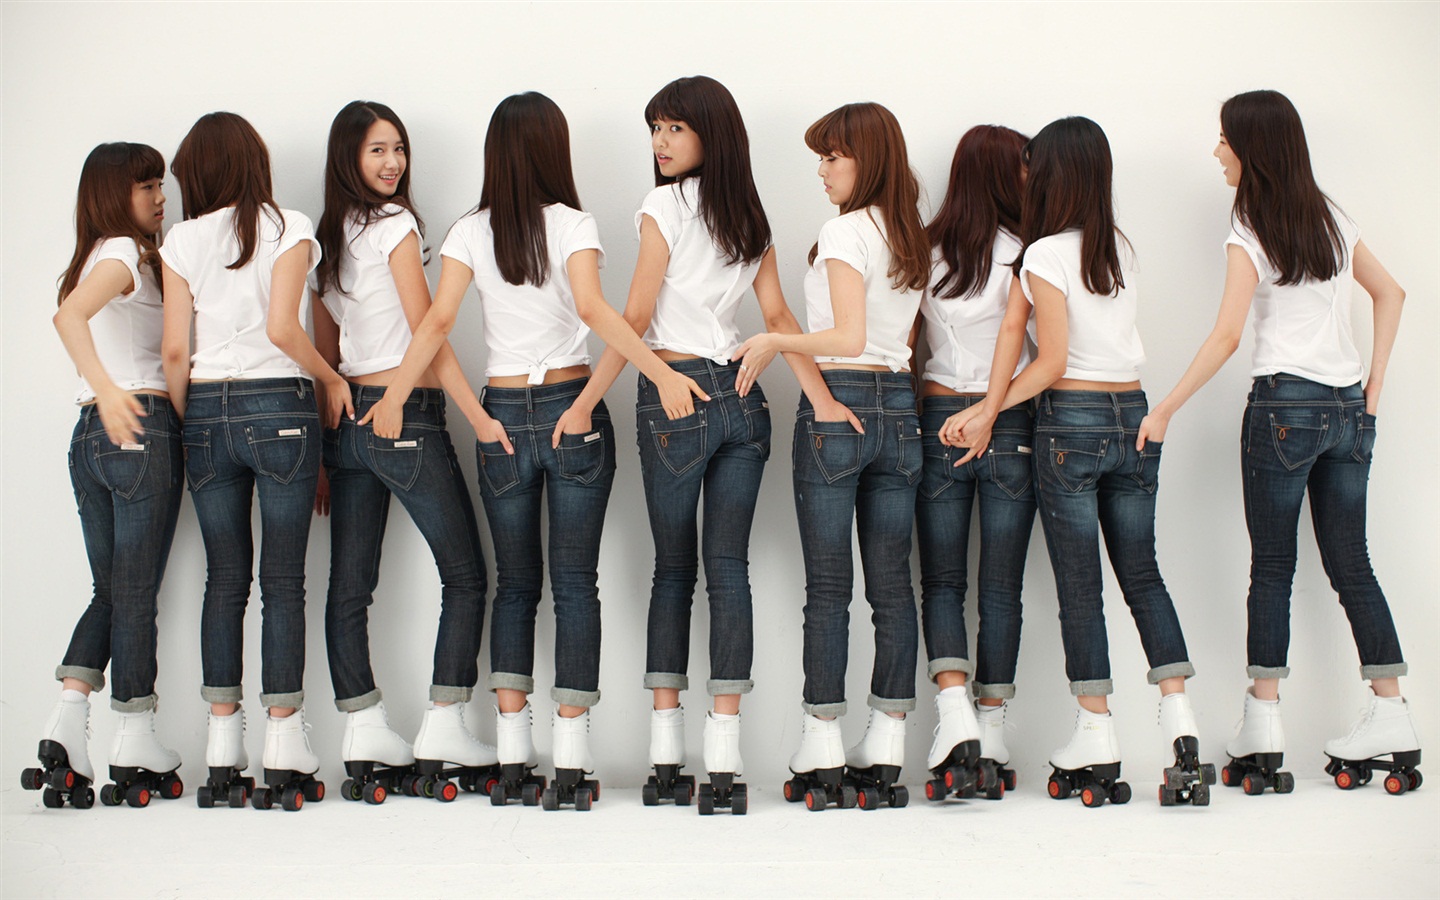 Girls Generation latest HD wallpapers collection #13 - 1440x900